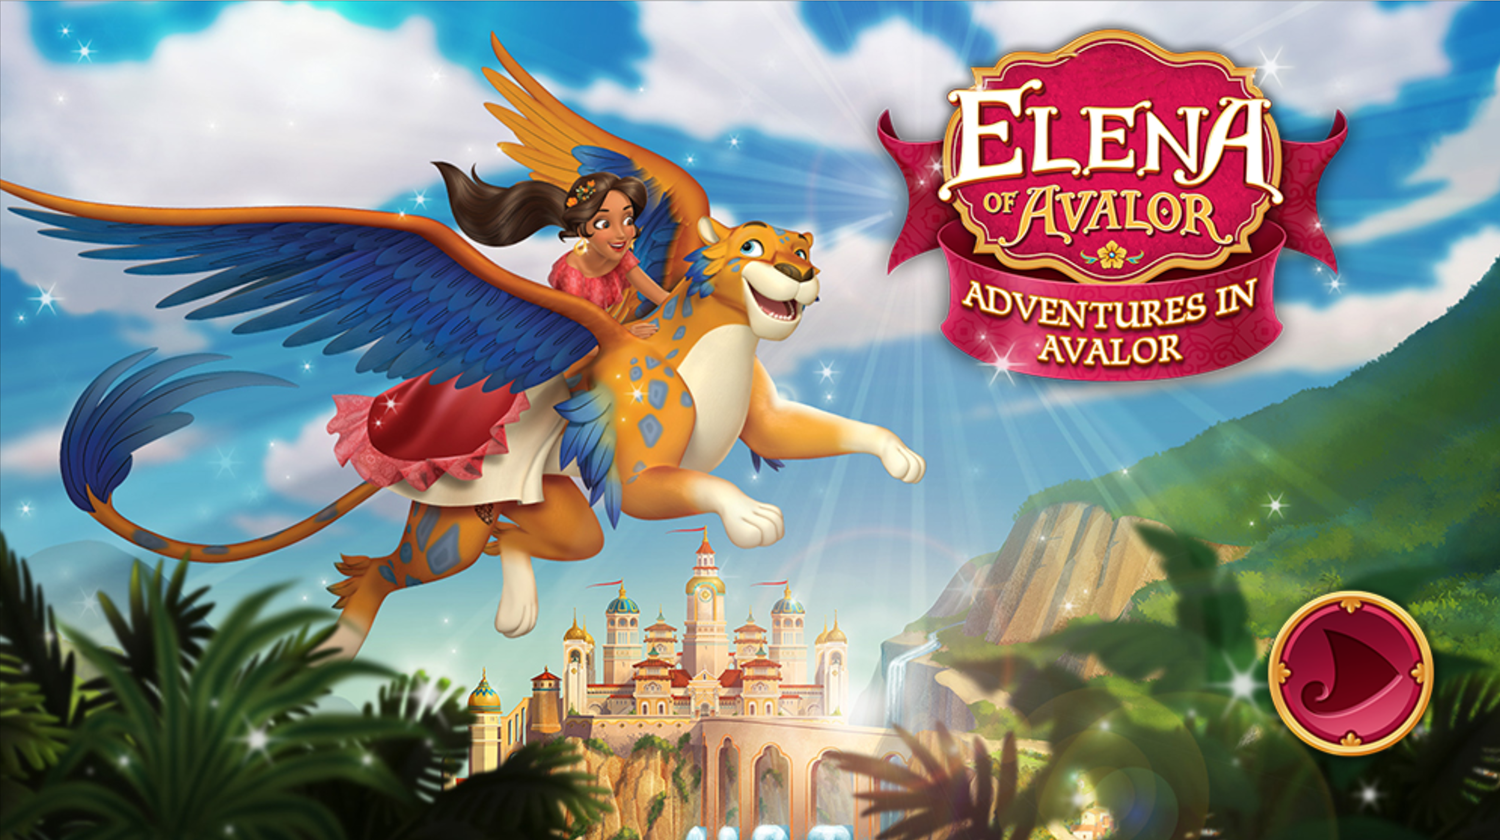 Elena of Avalor Adventures in Avalor Game Welcome Screen Screenshot.